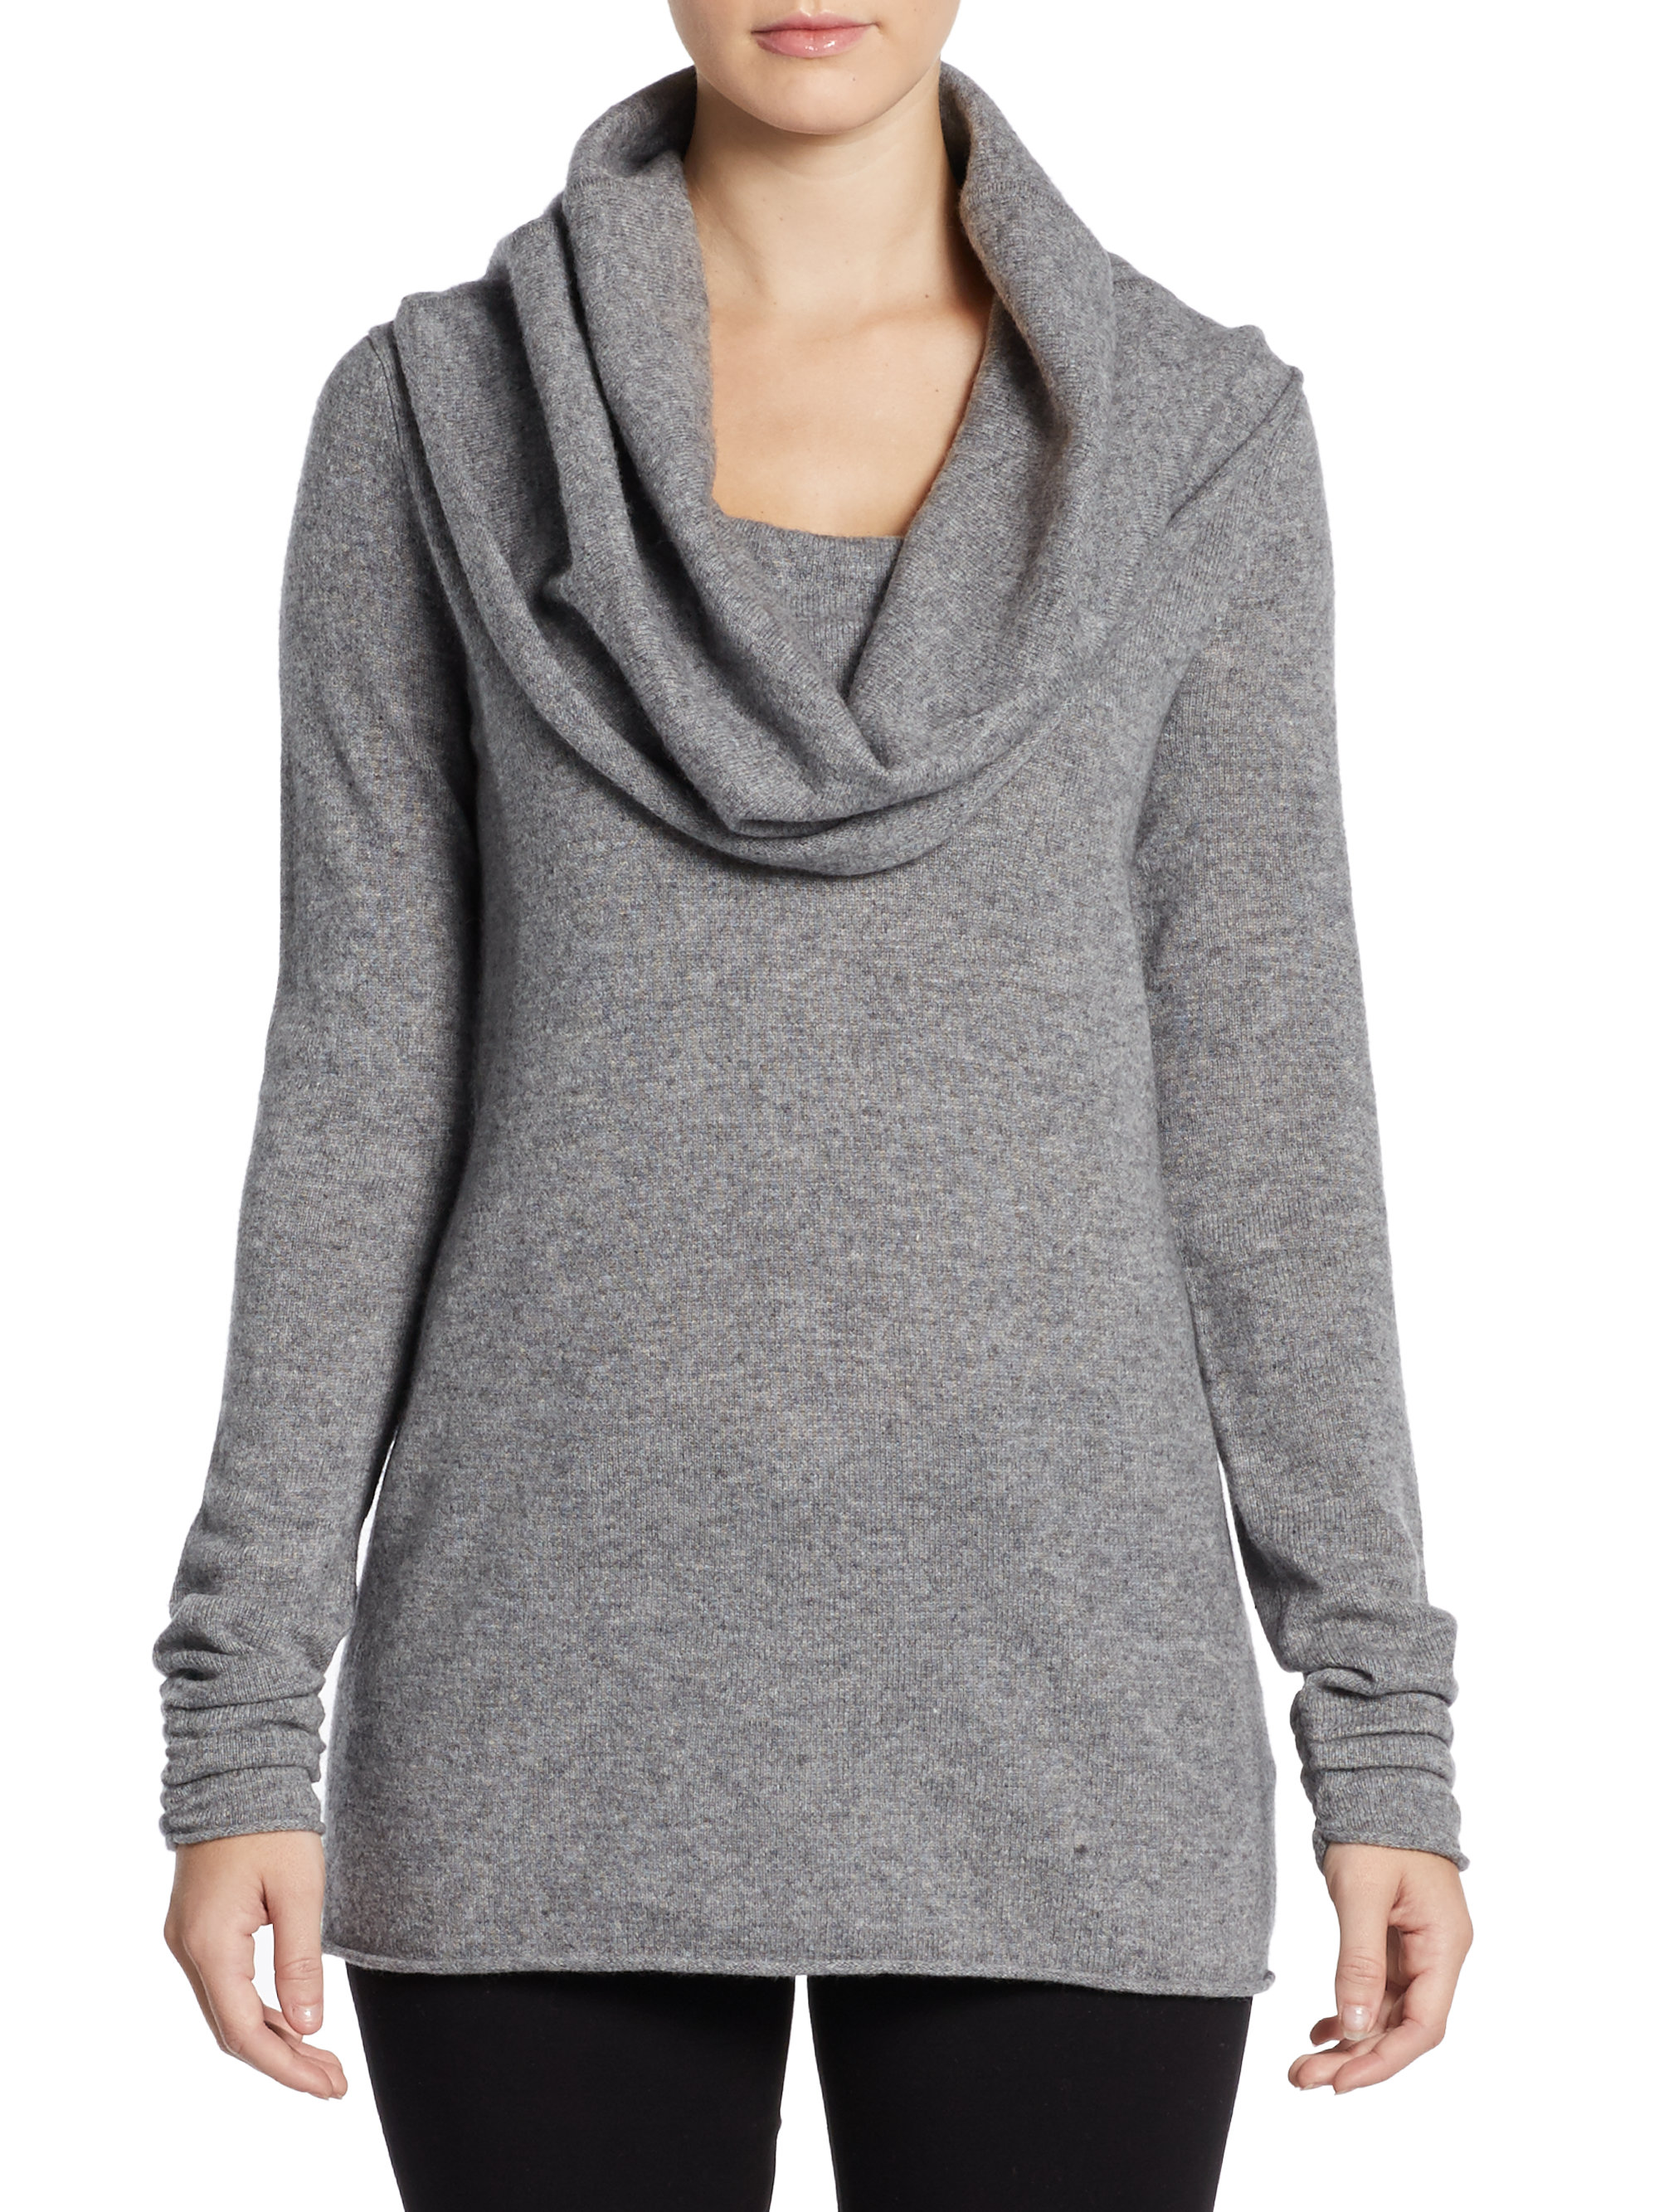 Saks Fifth Avenue Black Cashmere Cowl Neck Sweater in Gray (GREY) | Lyst